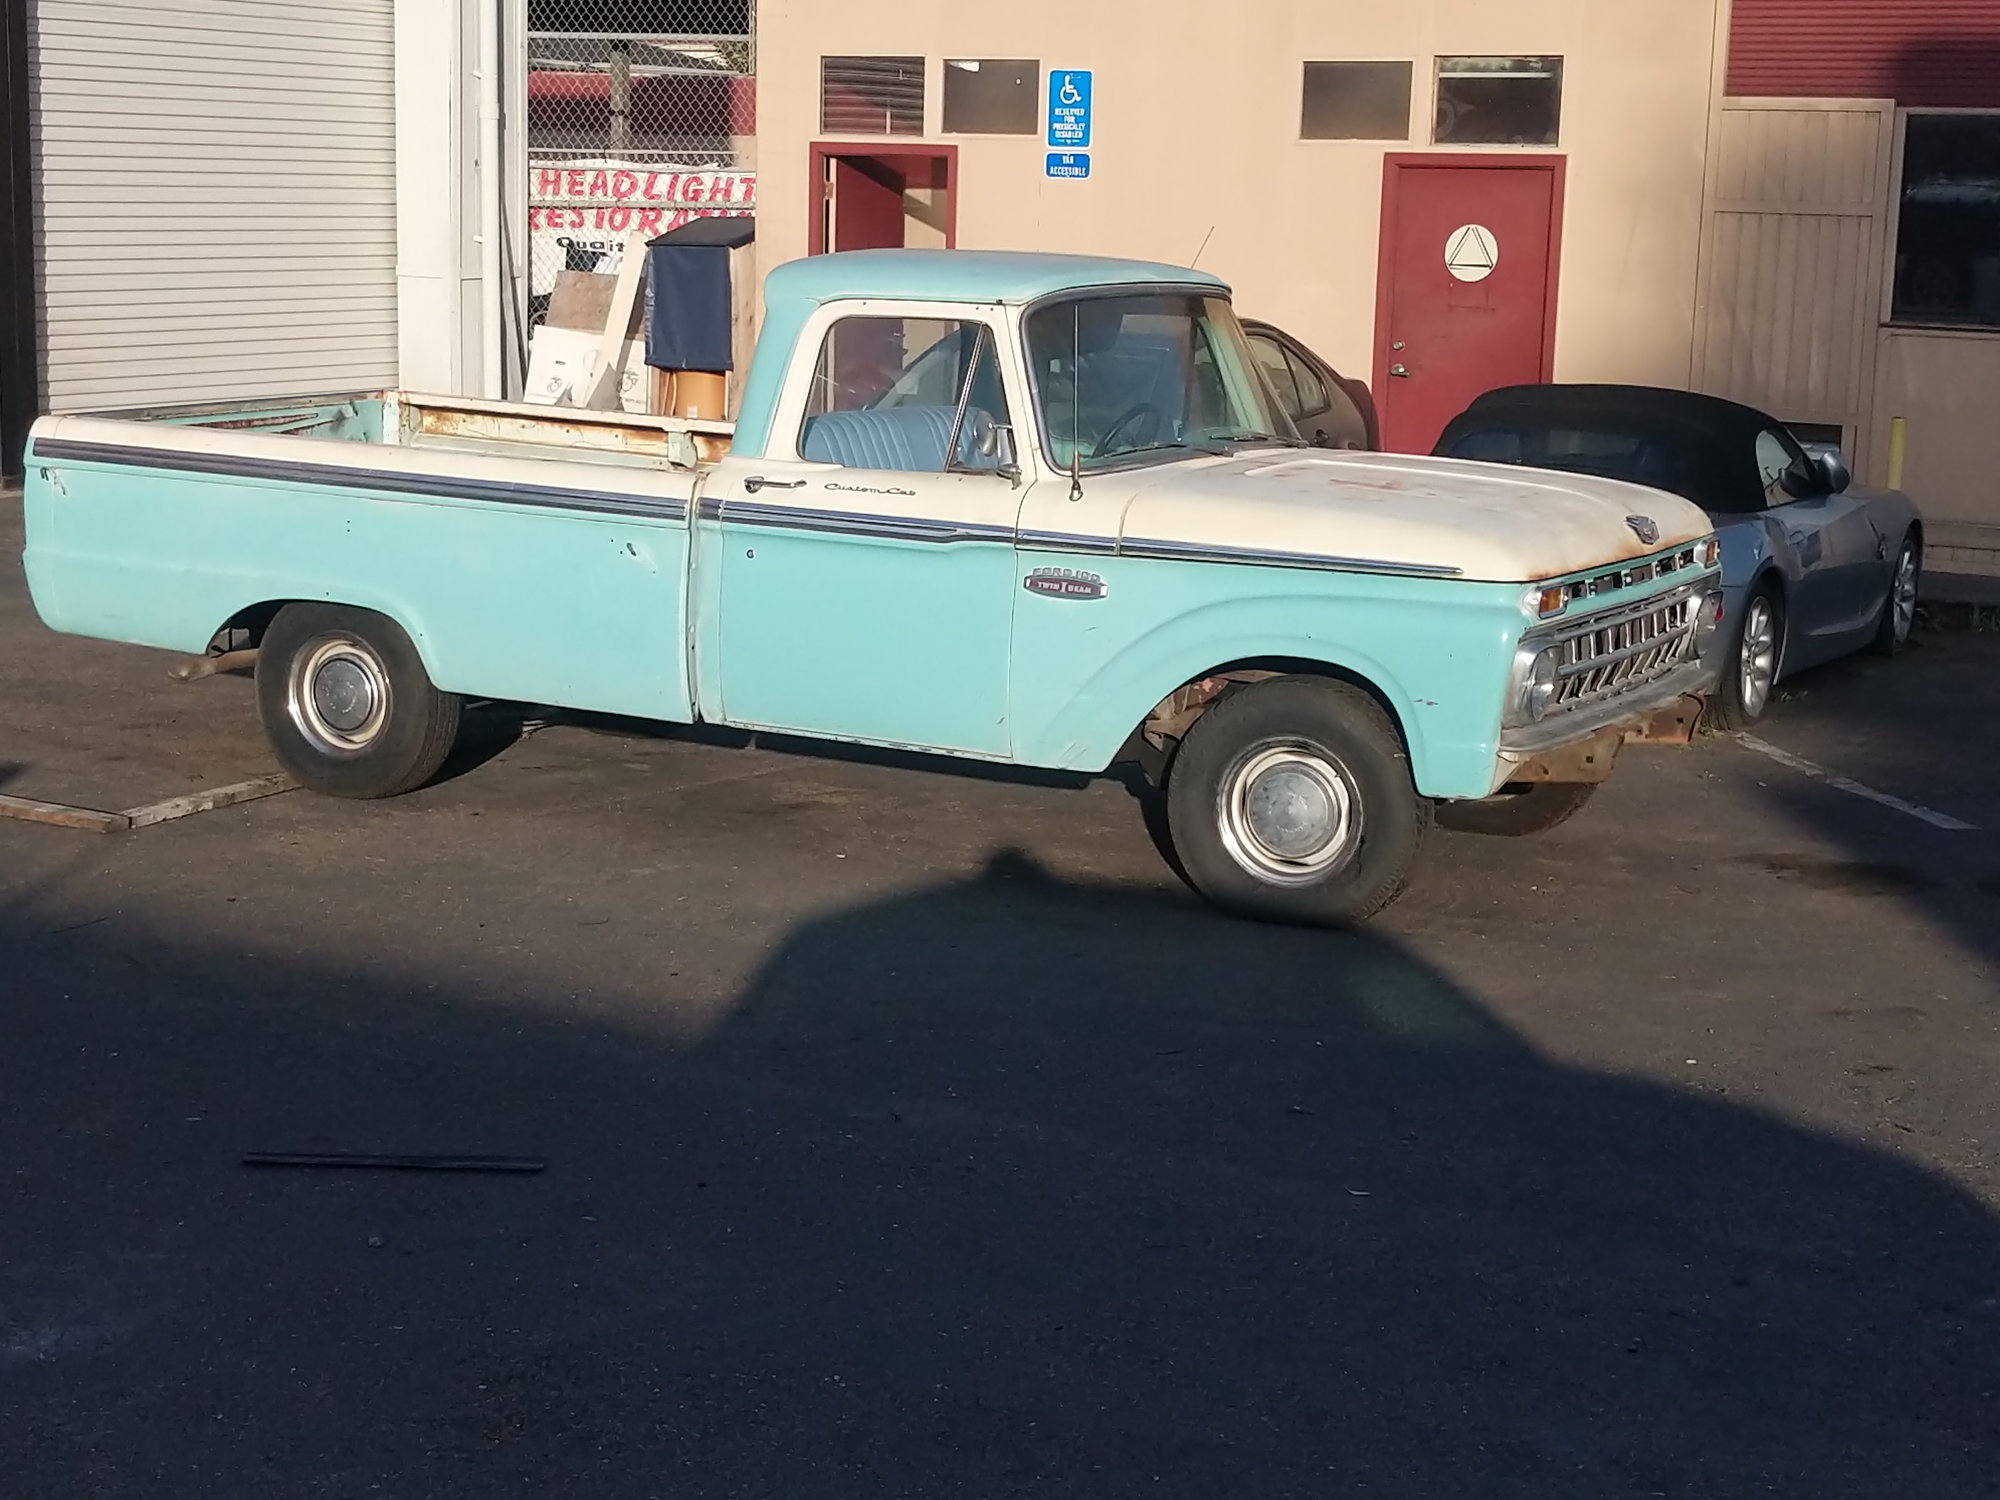 1965 Ford F-100 - 1965 F-100 Rust free project!! - Used - VIN F10DK603484 - 64,247 Miles - 8 cyl - 2WD - Automatic - Truck - Blue - San Diego, CA 92021, United States